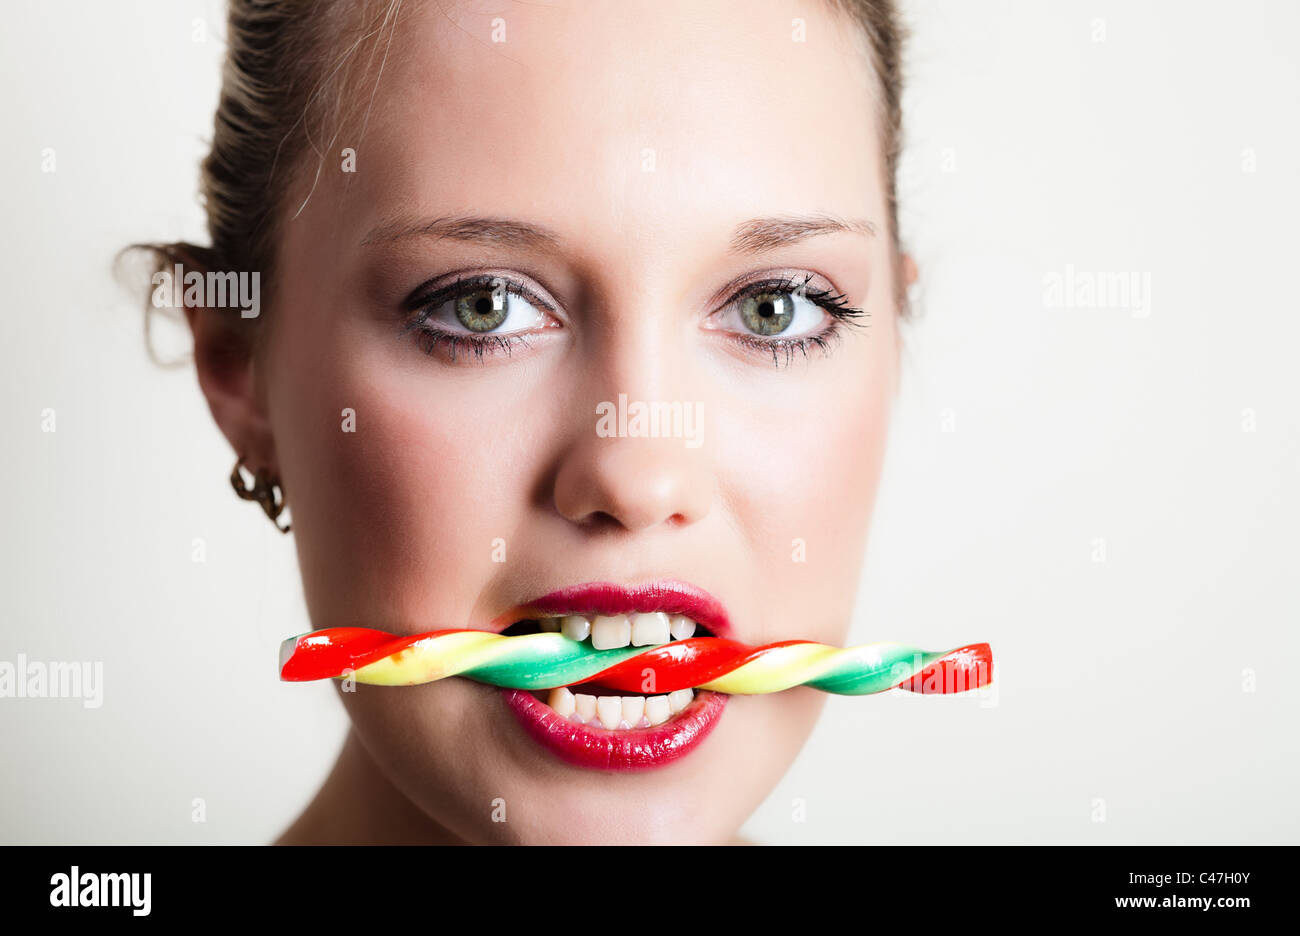 Portrait of young woman holding colorful candy in her teeth Stock Photo